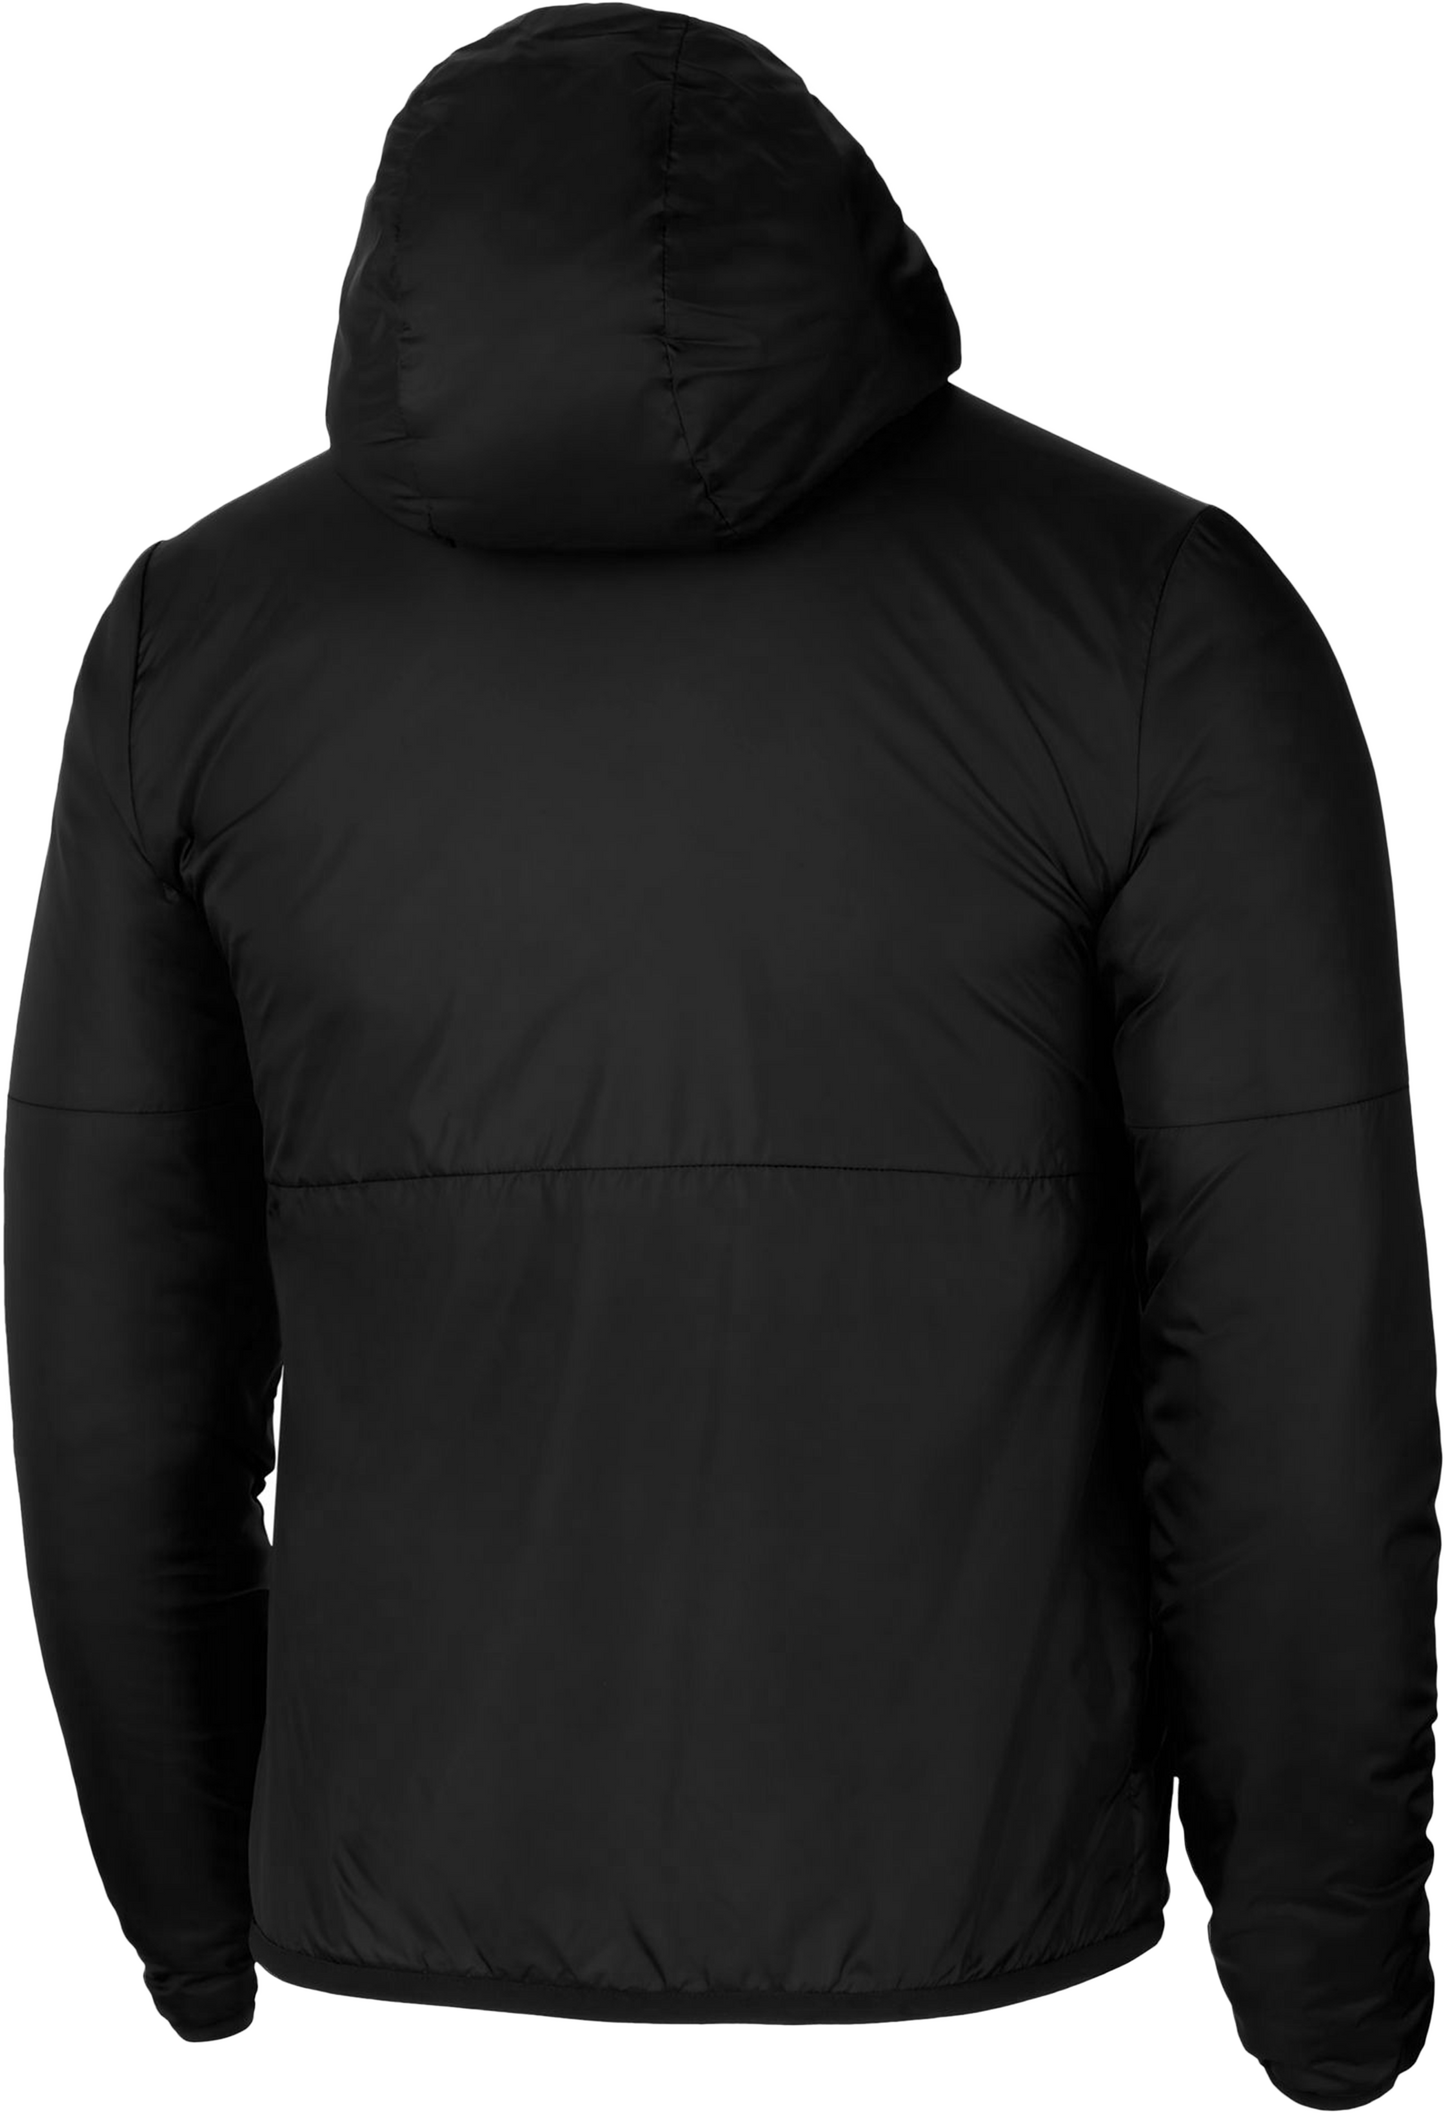 WUFC Therma Repel Jacket [Women's]